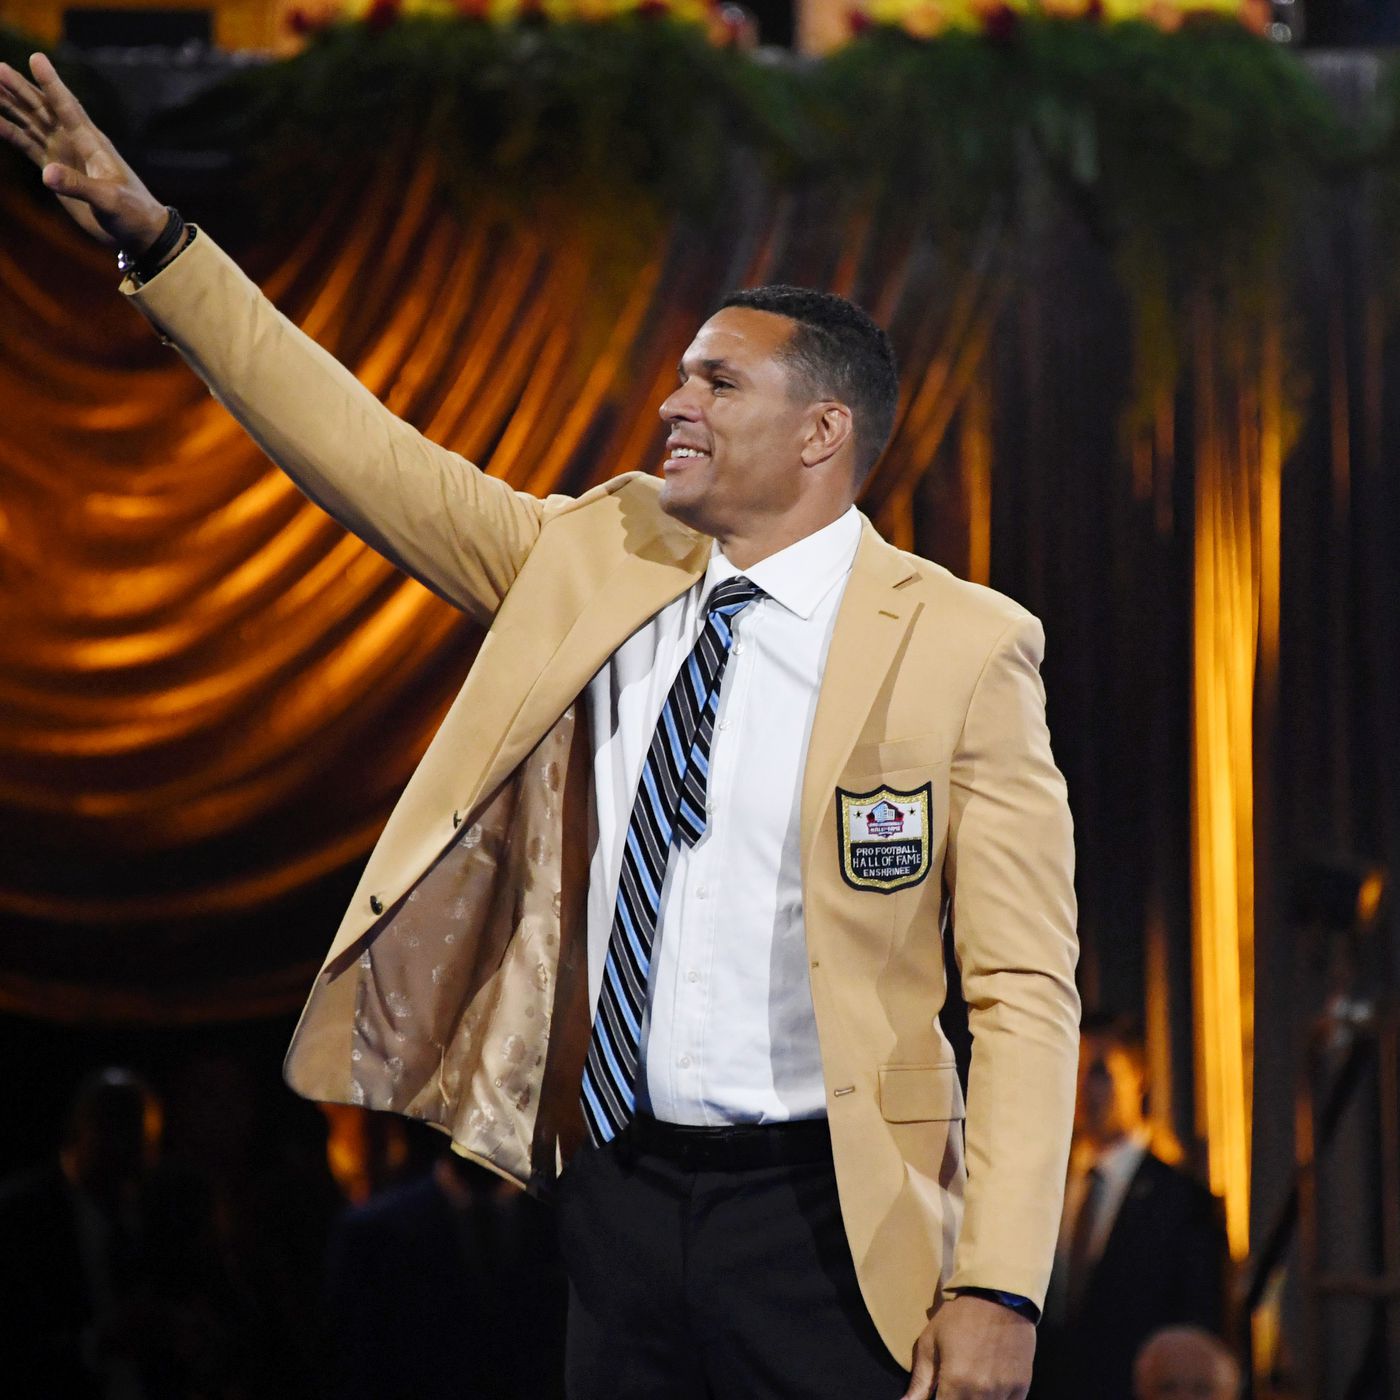 pro football hall of fame gold jacket